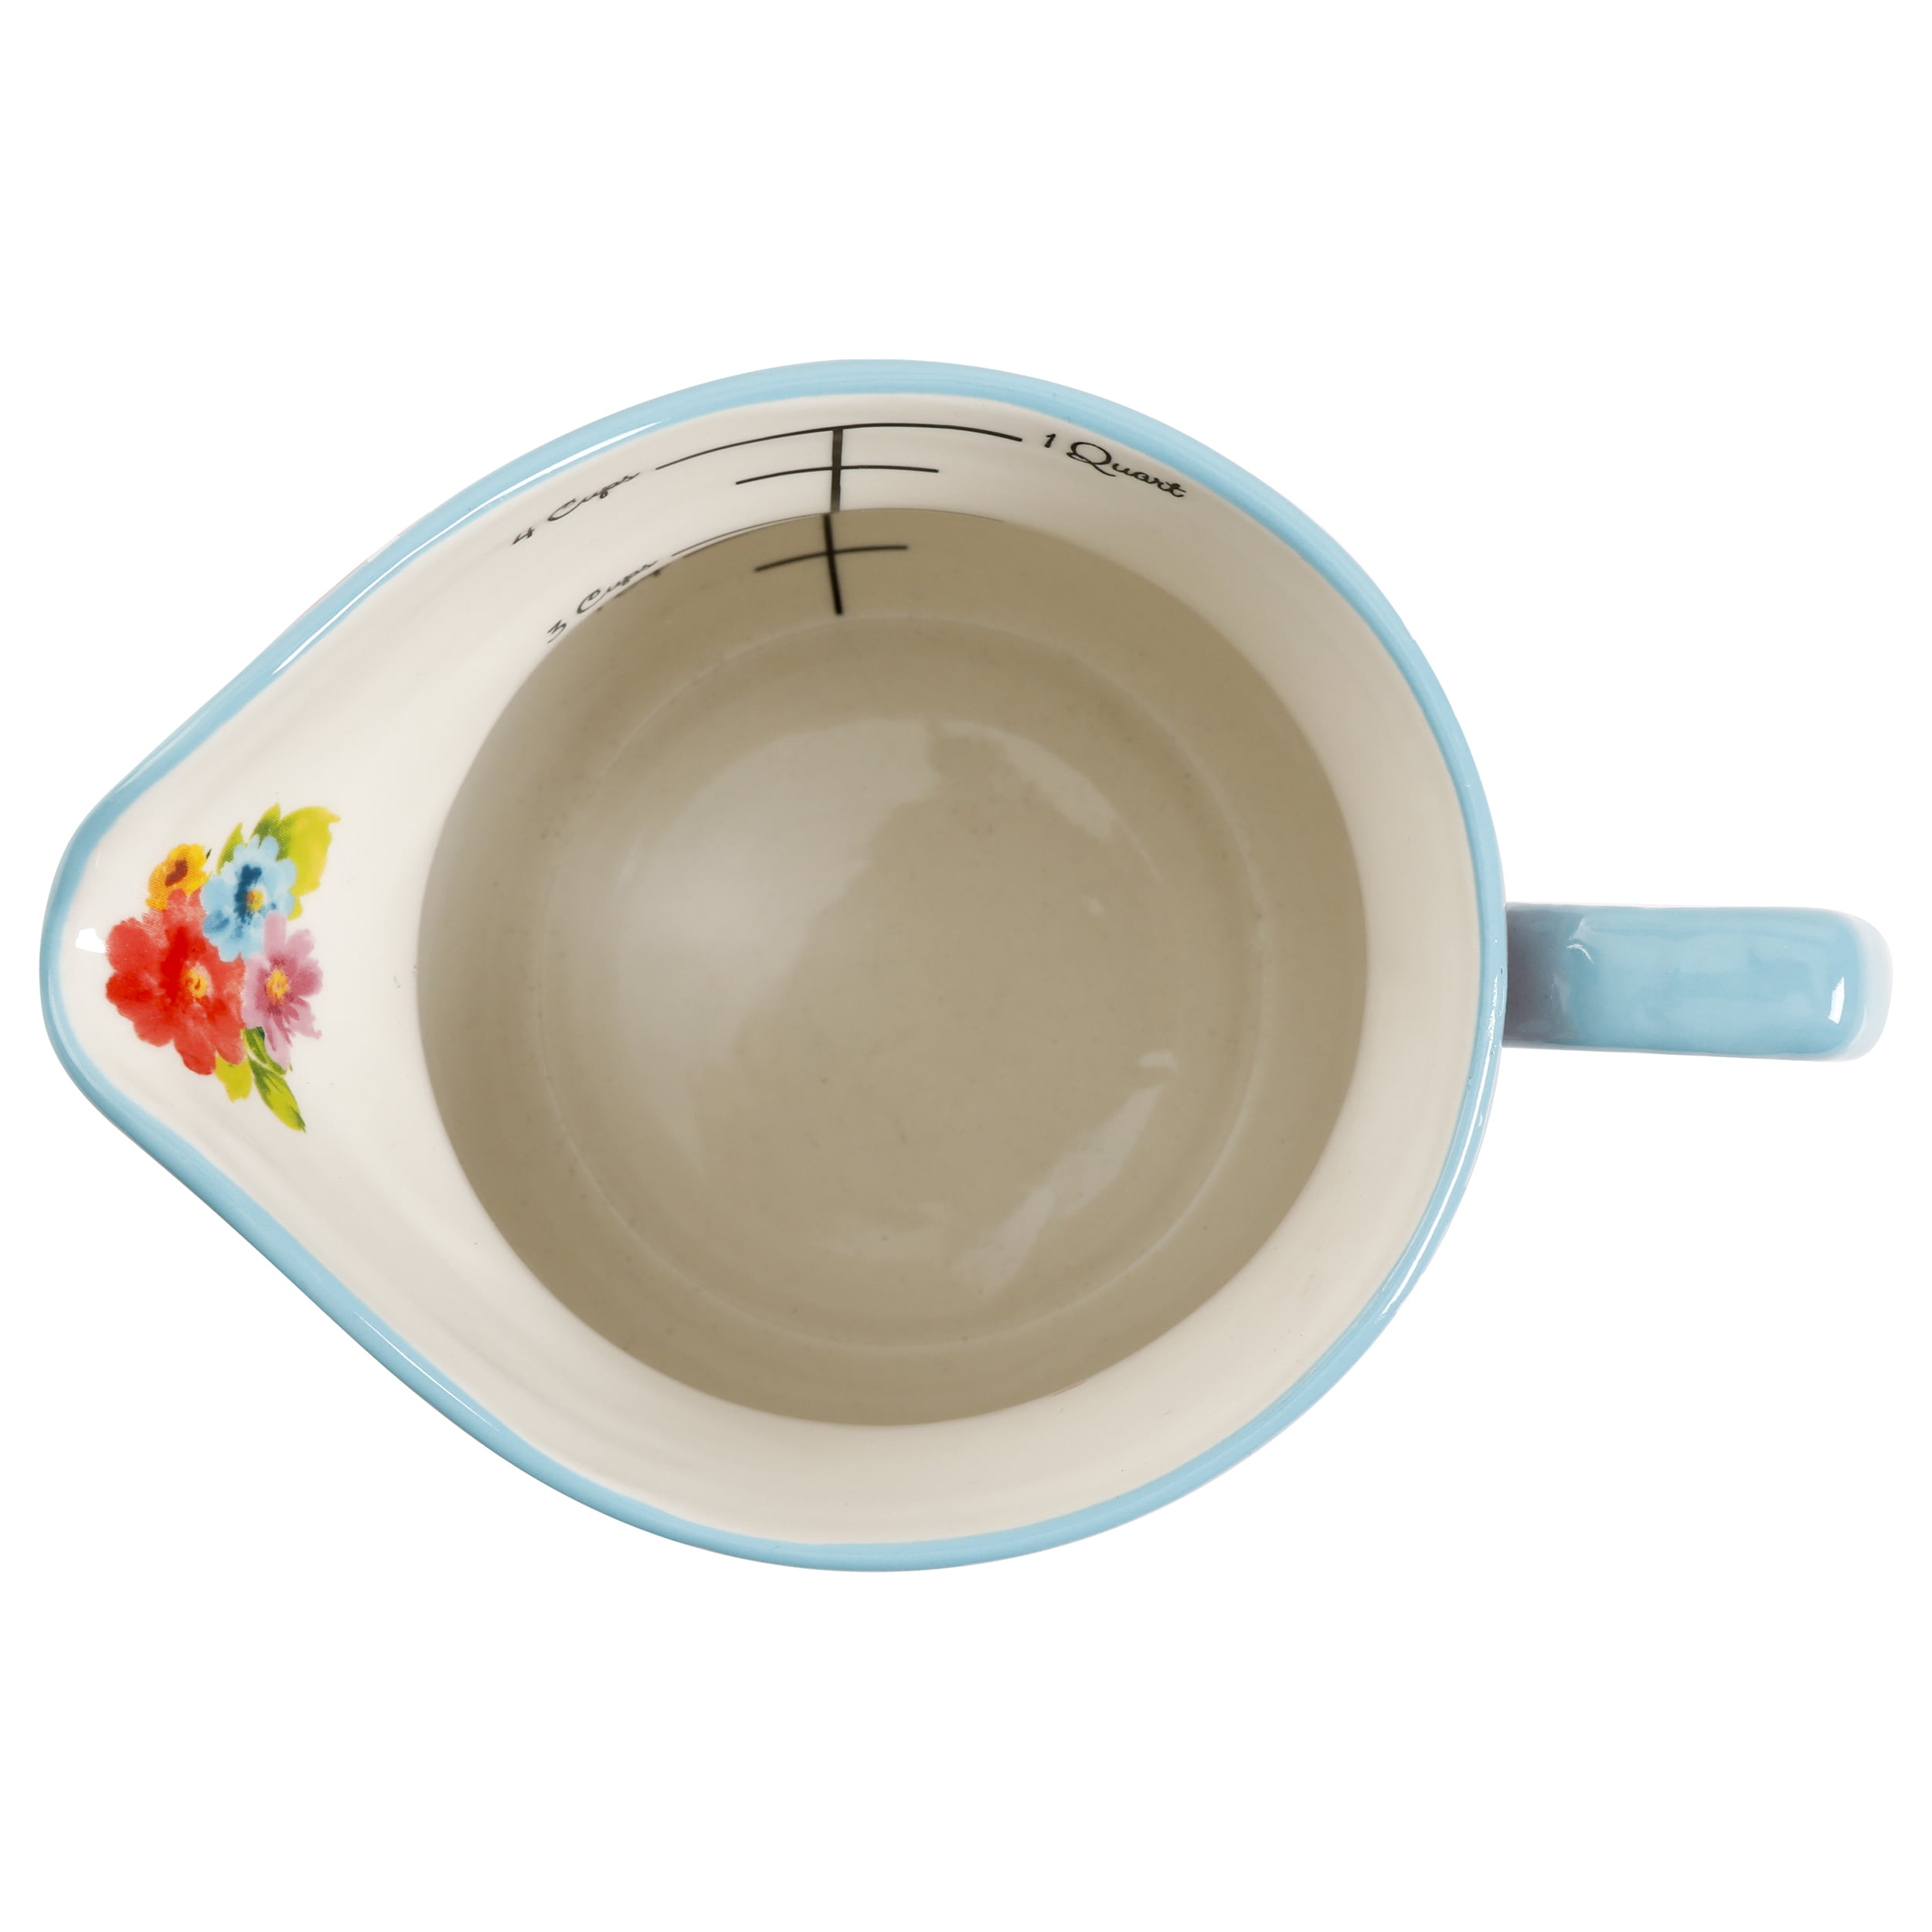 Measuring Cups Sets for sale in Springfield, Missouri